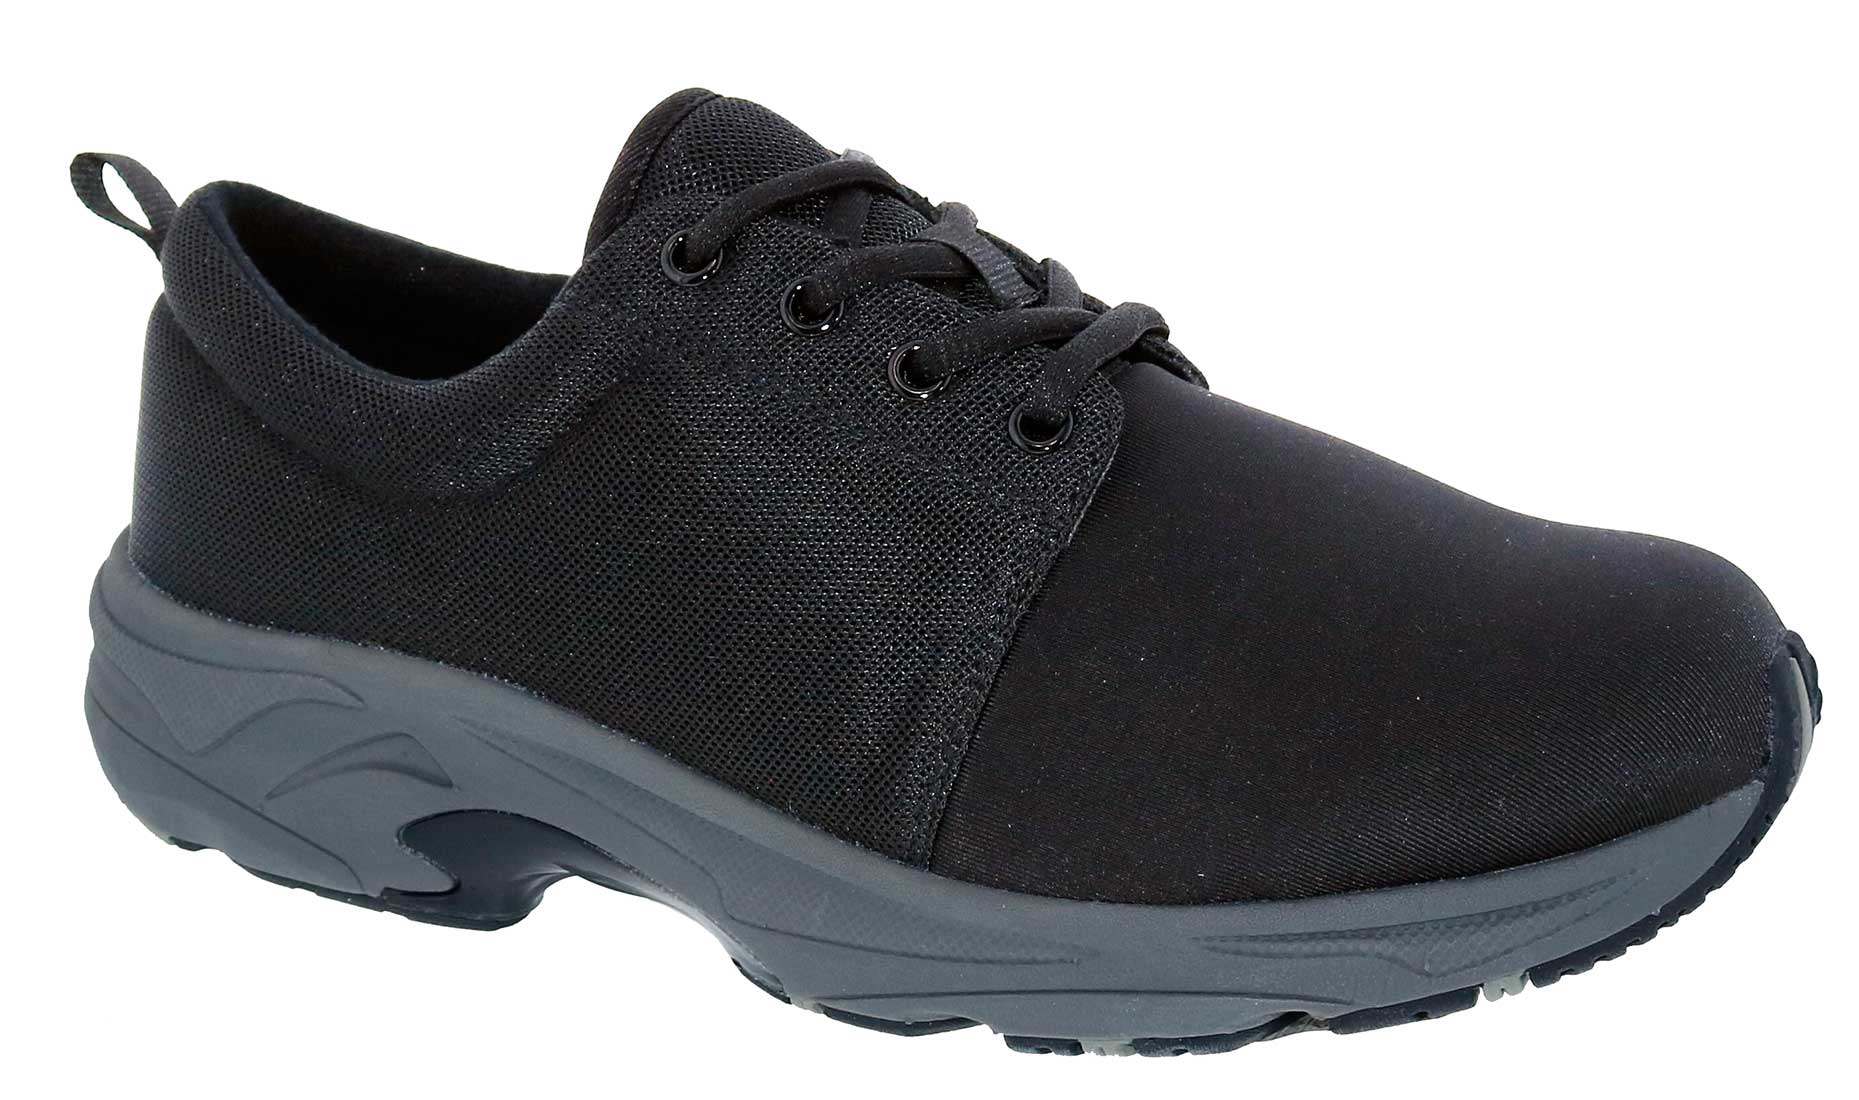 Footsaver Shoes Shuffle 90827 - Men's Casual Comfort Therapeutic Diabetic Shoe - Extra Depth For Orthotics